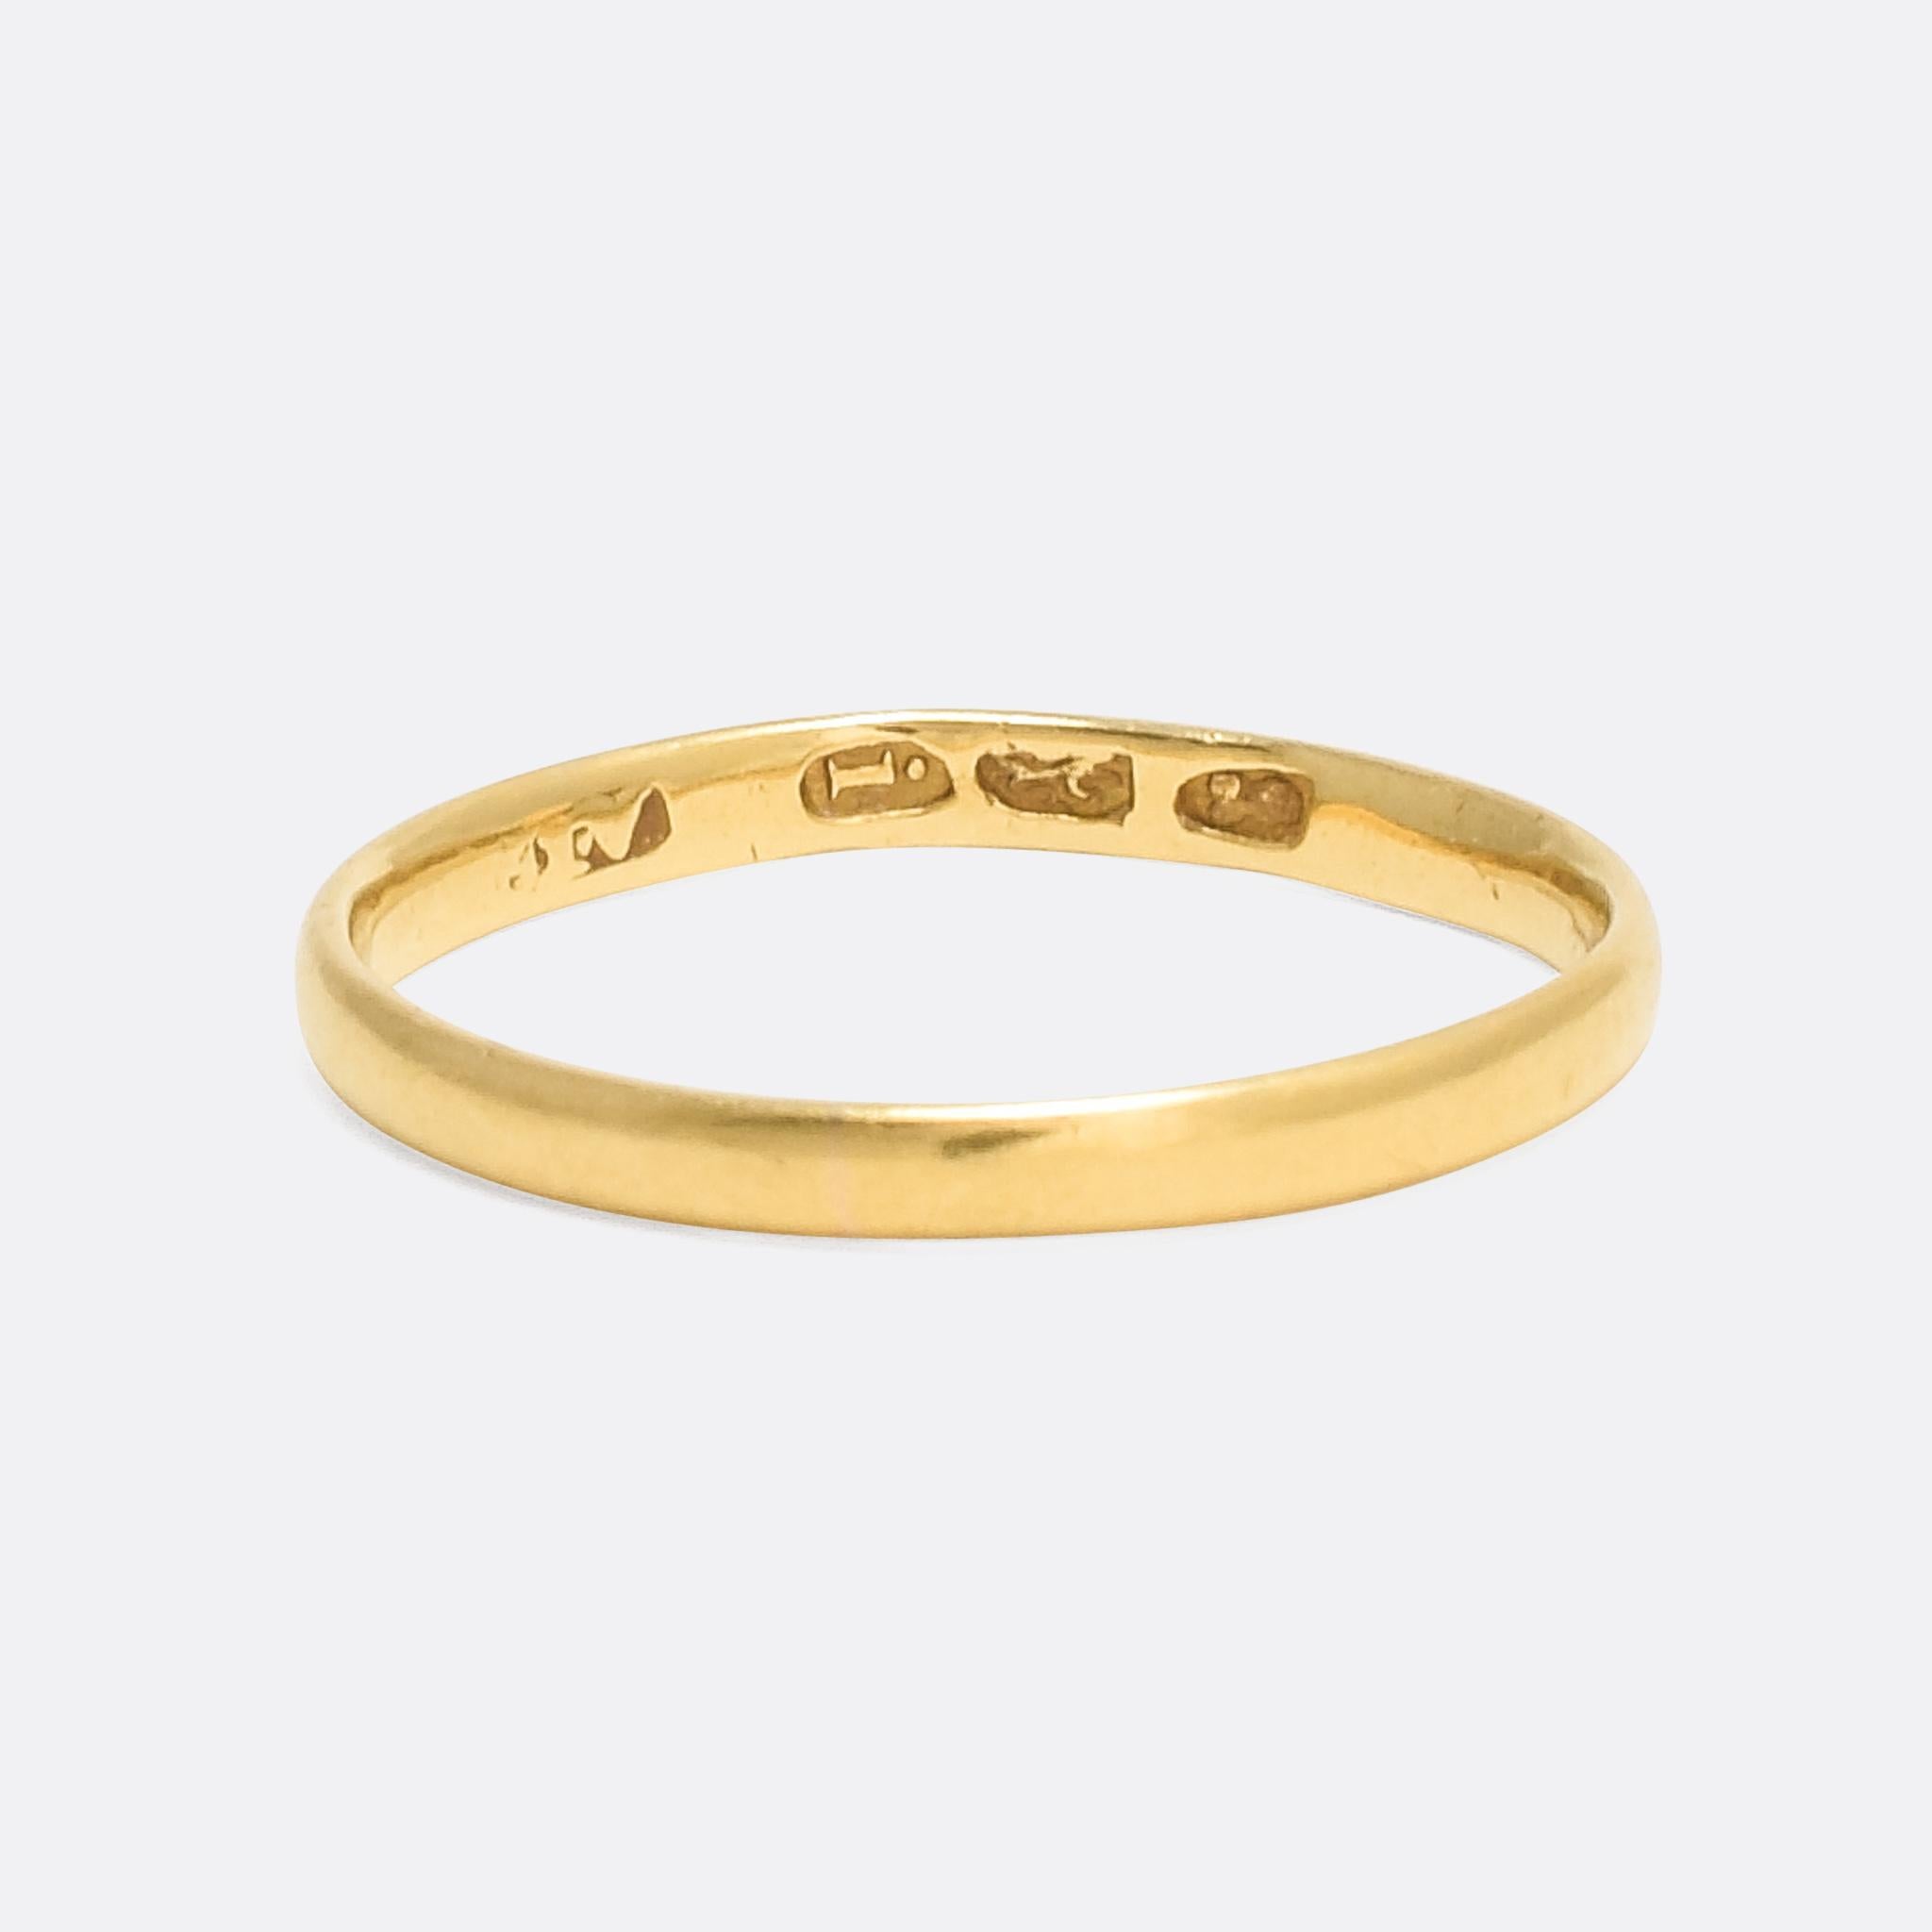 A fine Georgian wedding band, clearly hallmarked for 18k gold and the year 1824. These early wedding bands particularly well made, and are getting difficult to find.

RING SIZE
6.25 US

MEASUREMENTS
Width of band: 2.0mm

WEIGHT
1.6g

MARKS
English